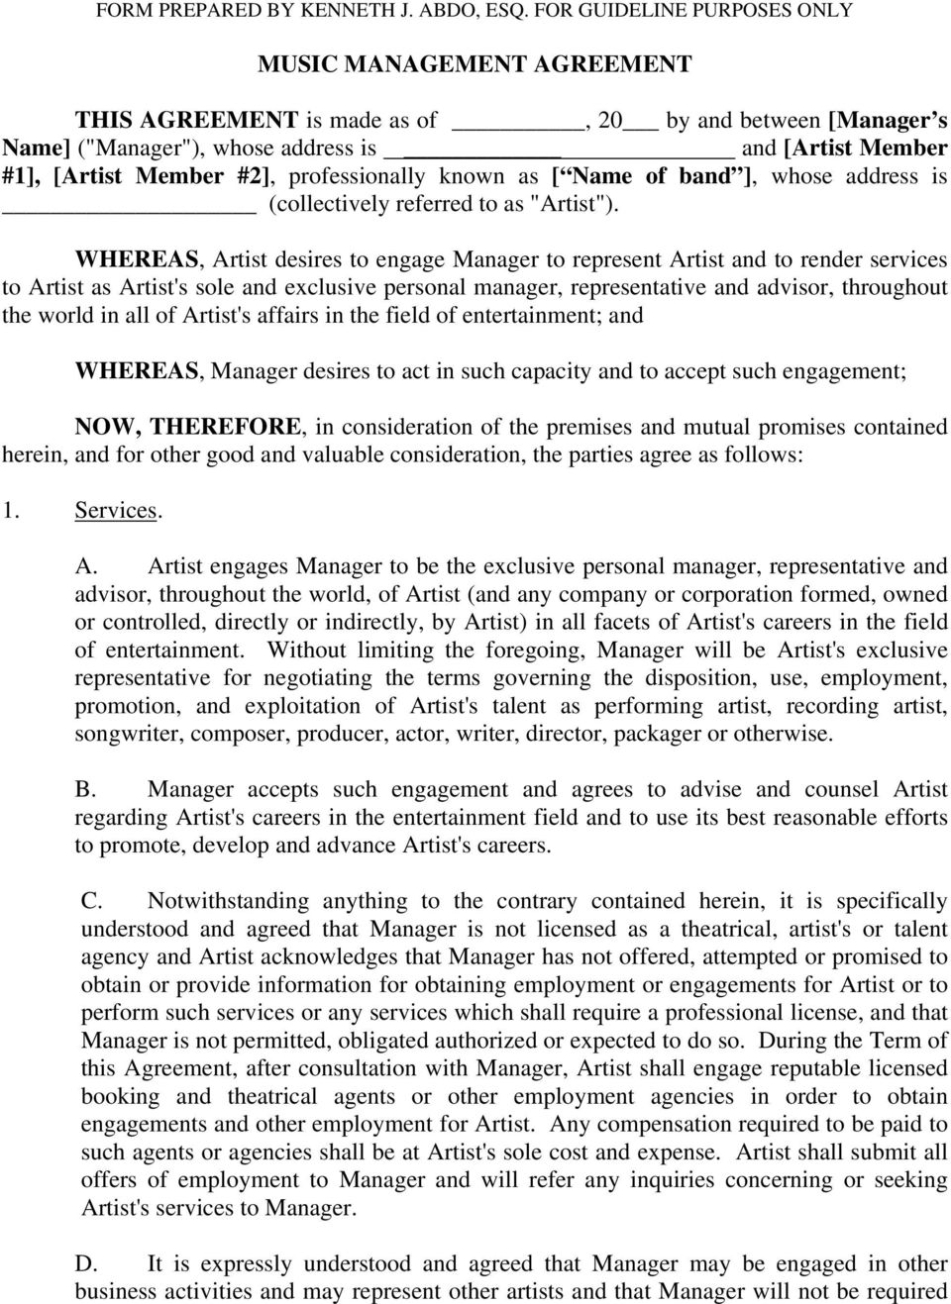 Talent Management Agreement Template For Talent Management Agreement Template